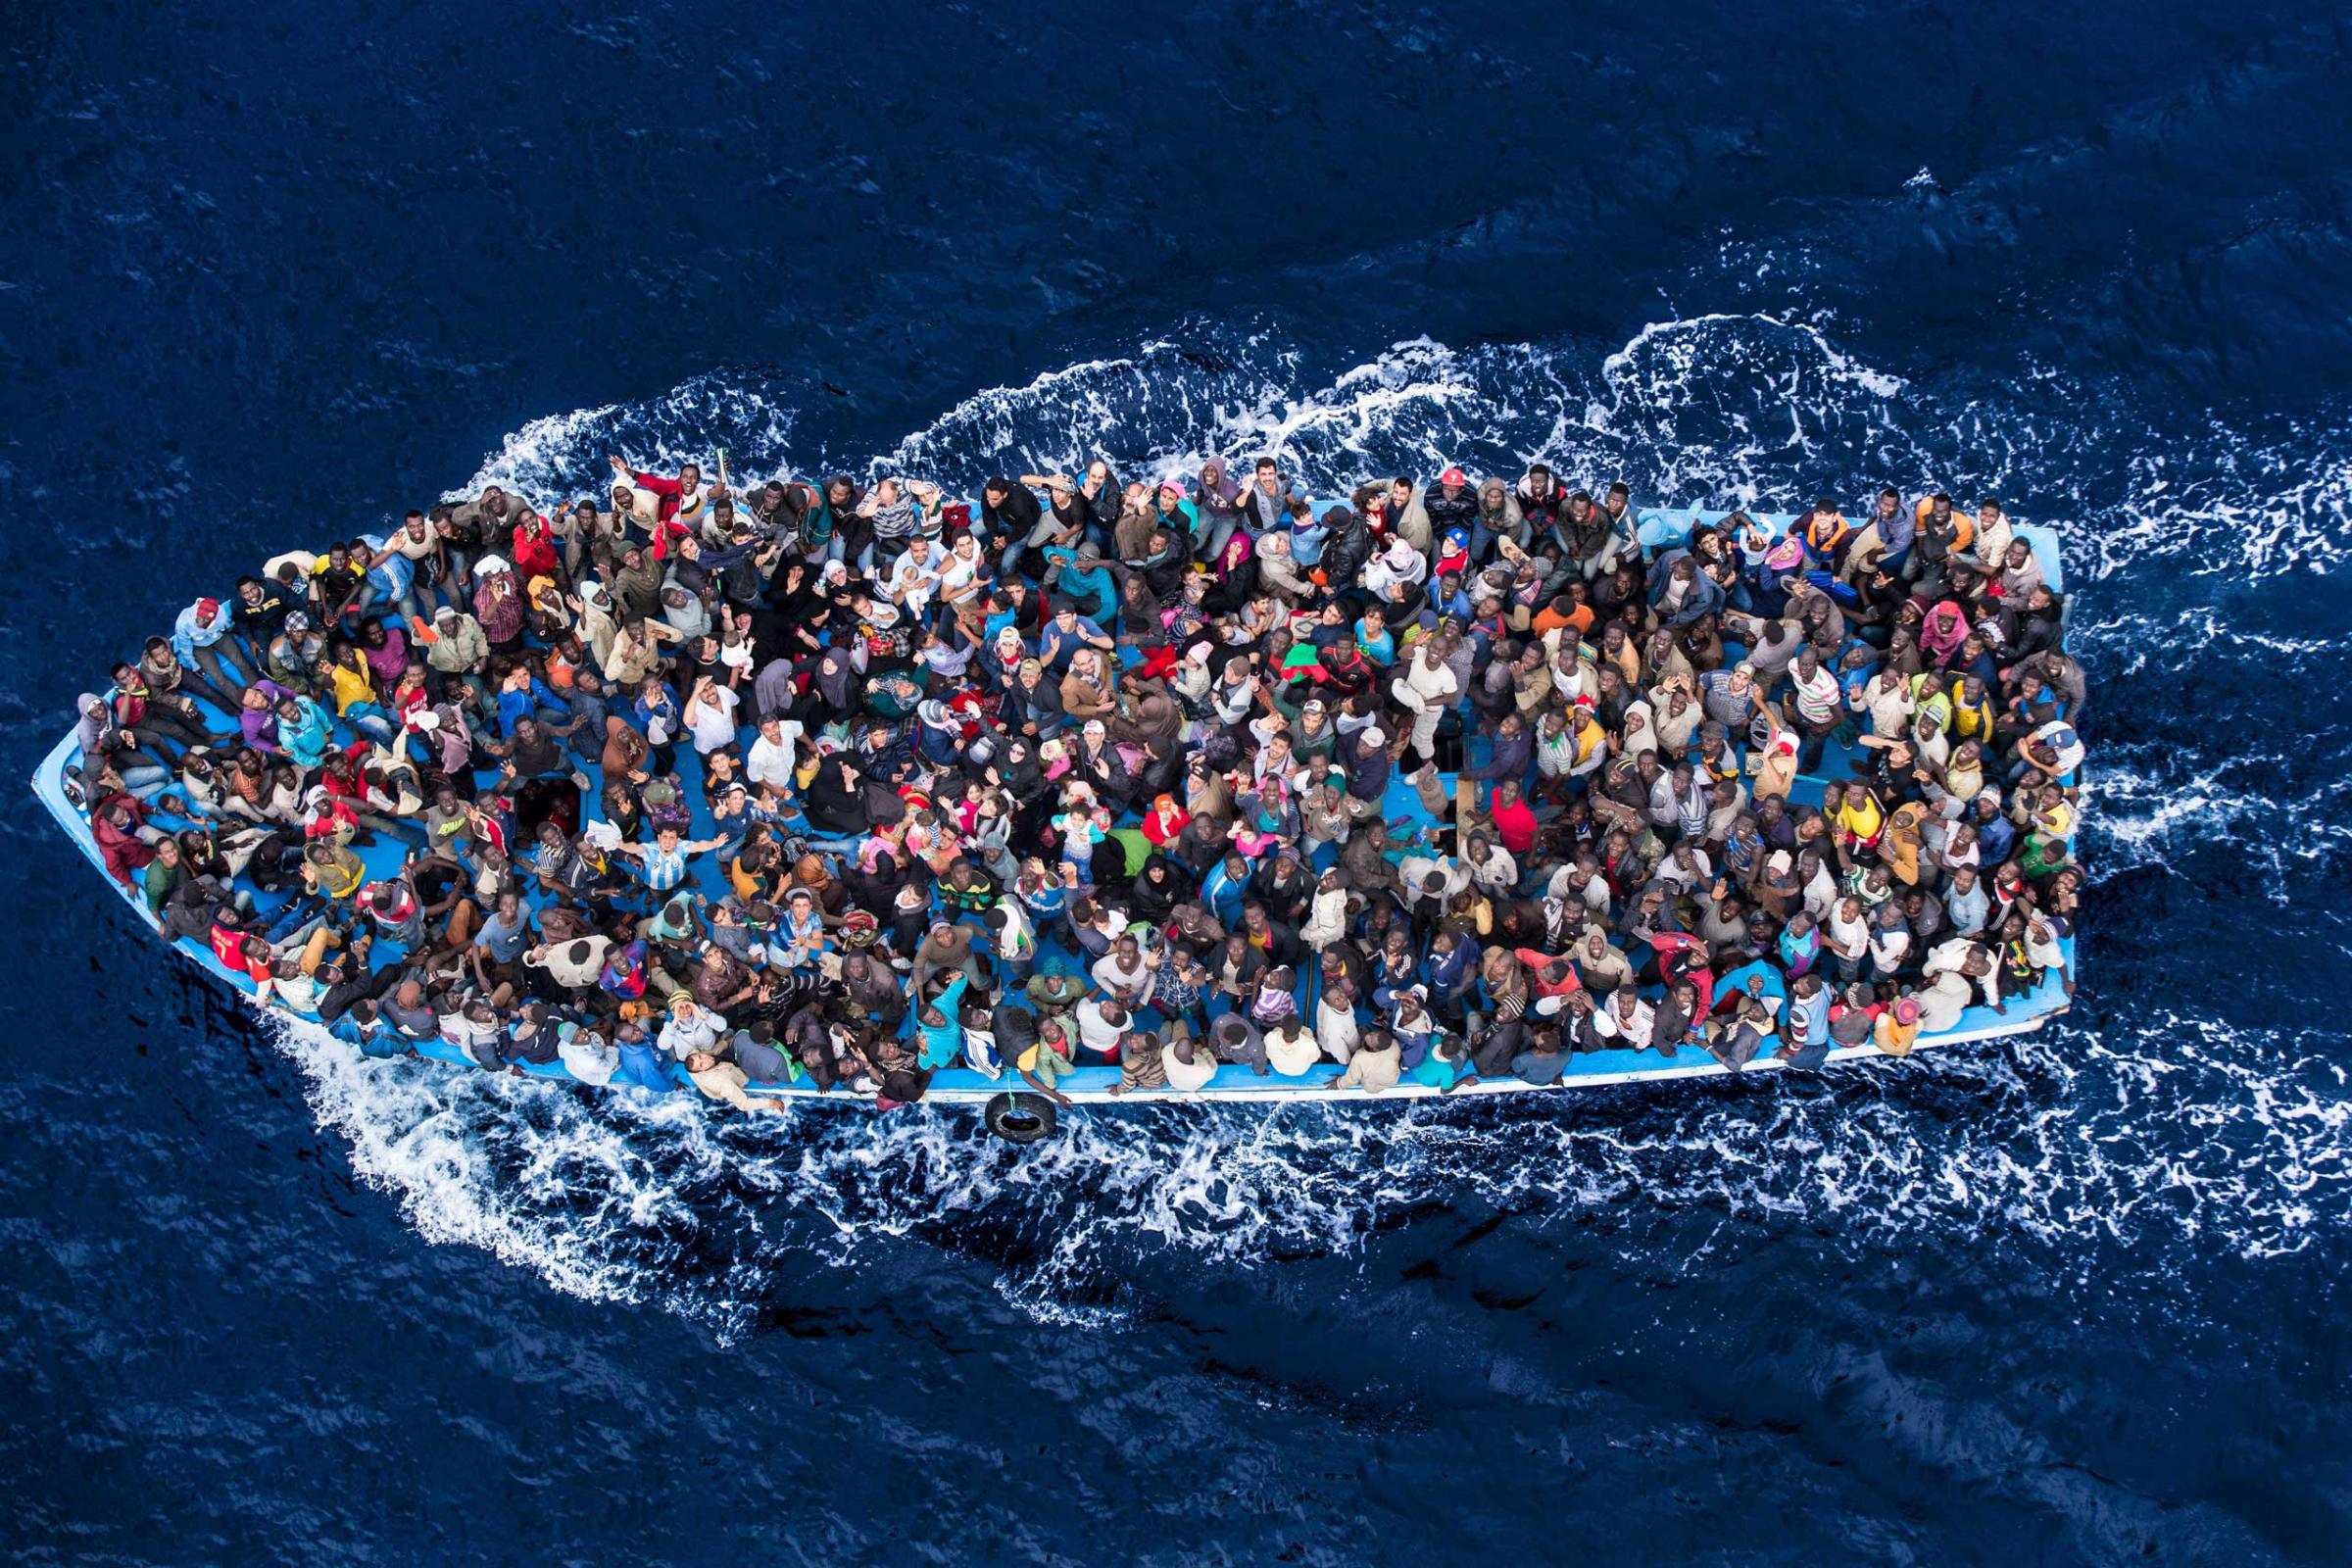 Italian navy rescues asylum seekers traveling by boat off the coast of Africa on the Mediterranean, June 7, 2014.